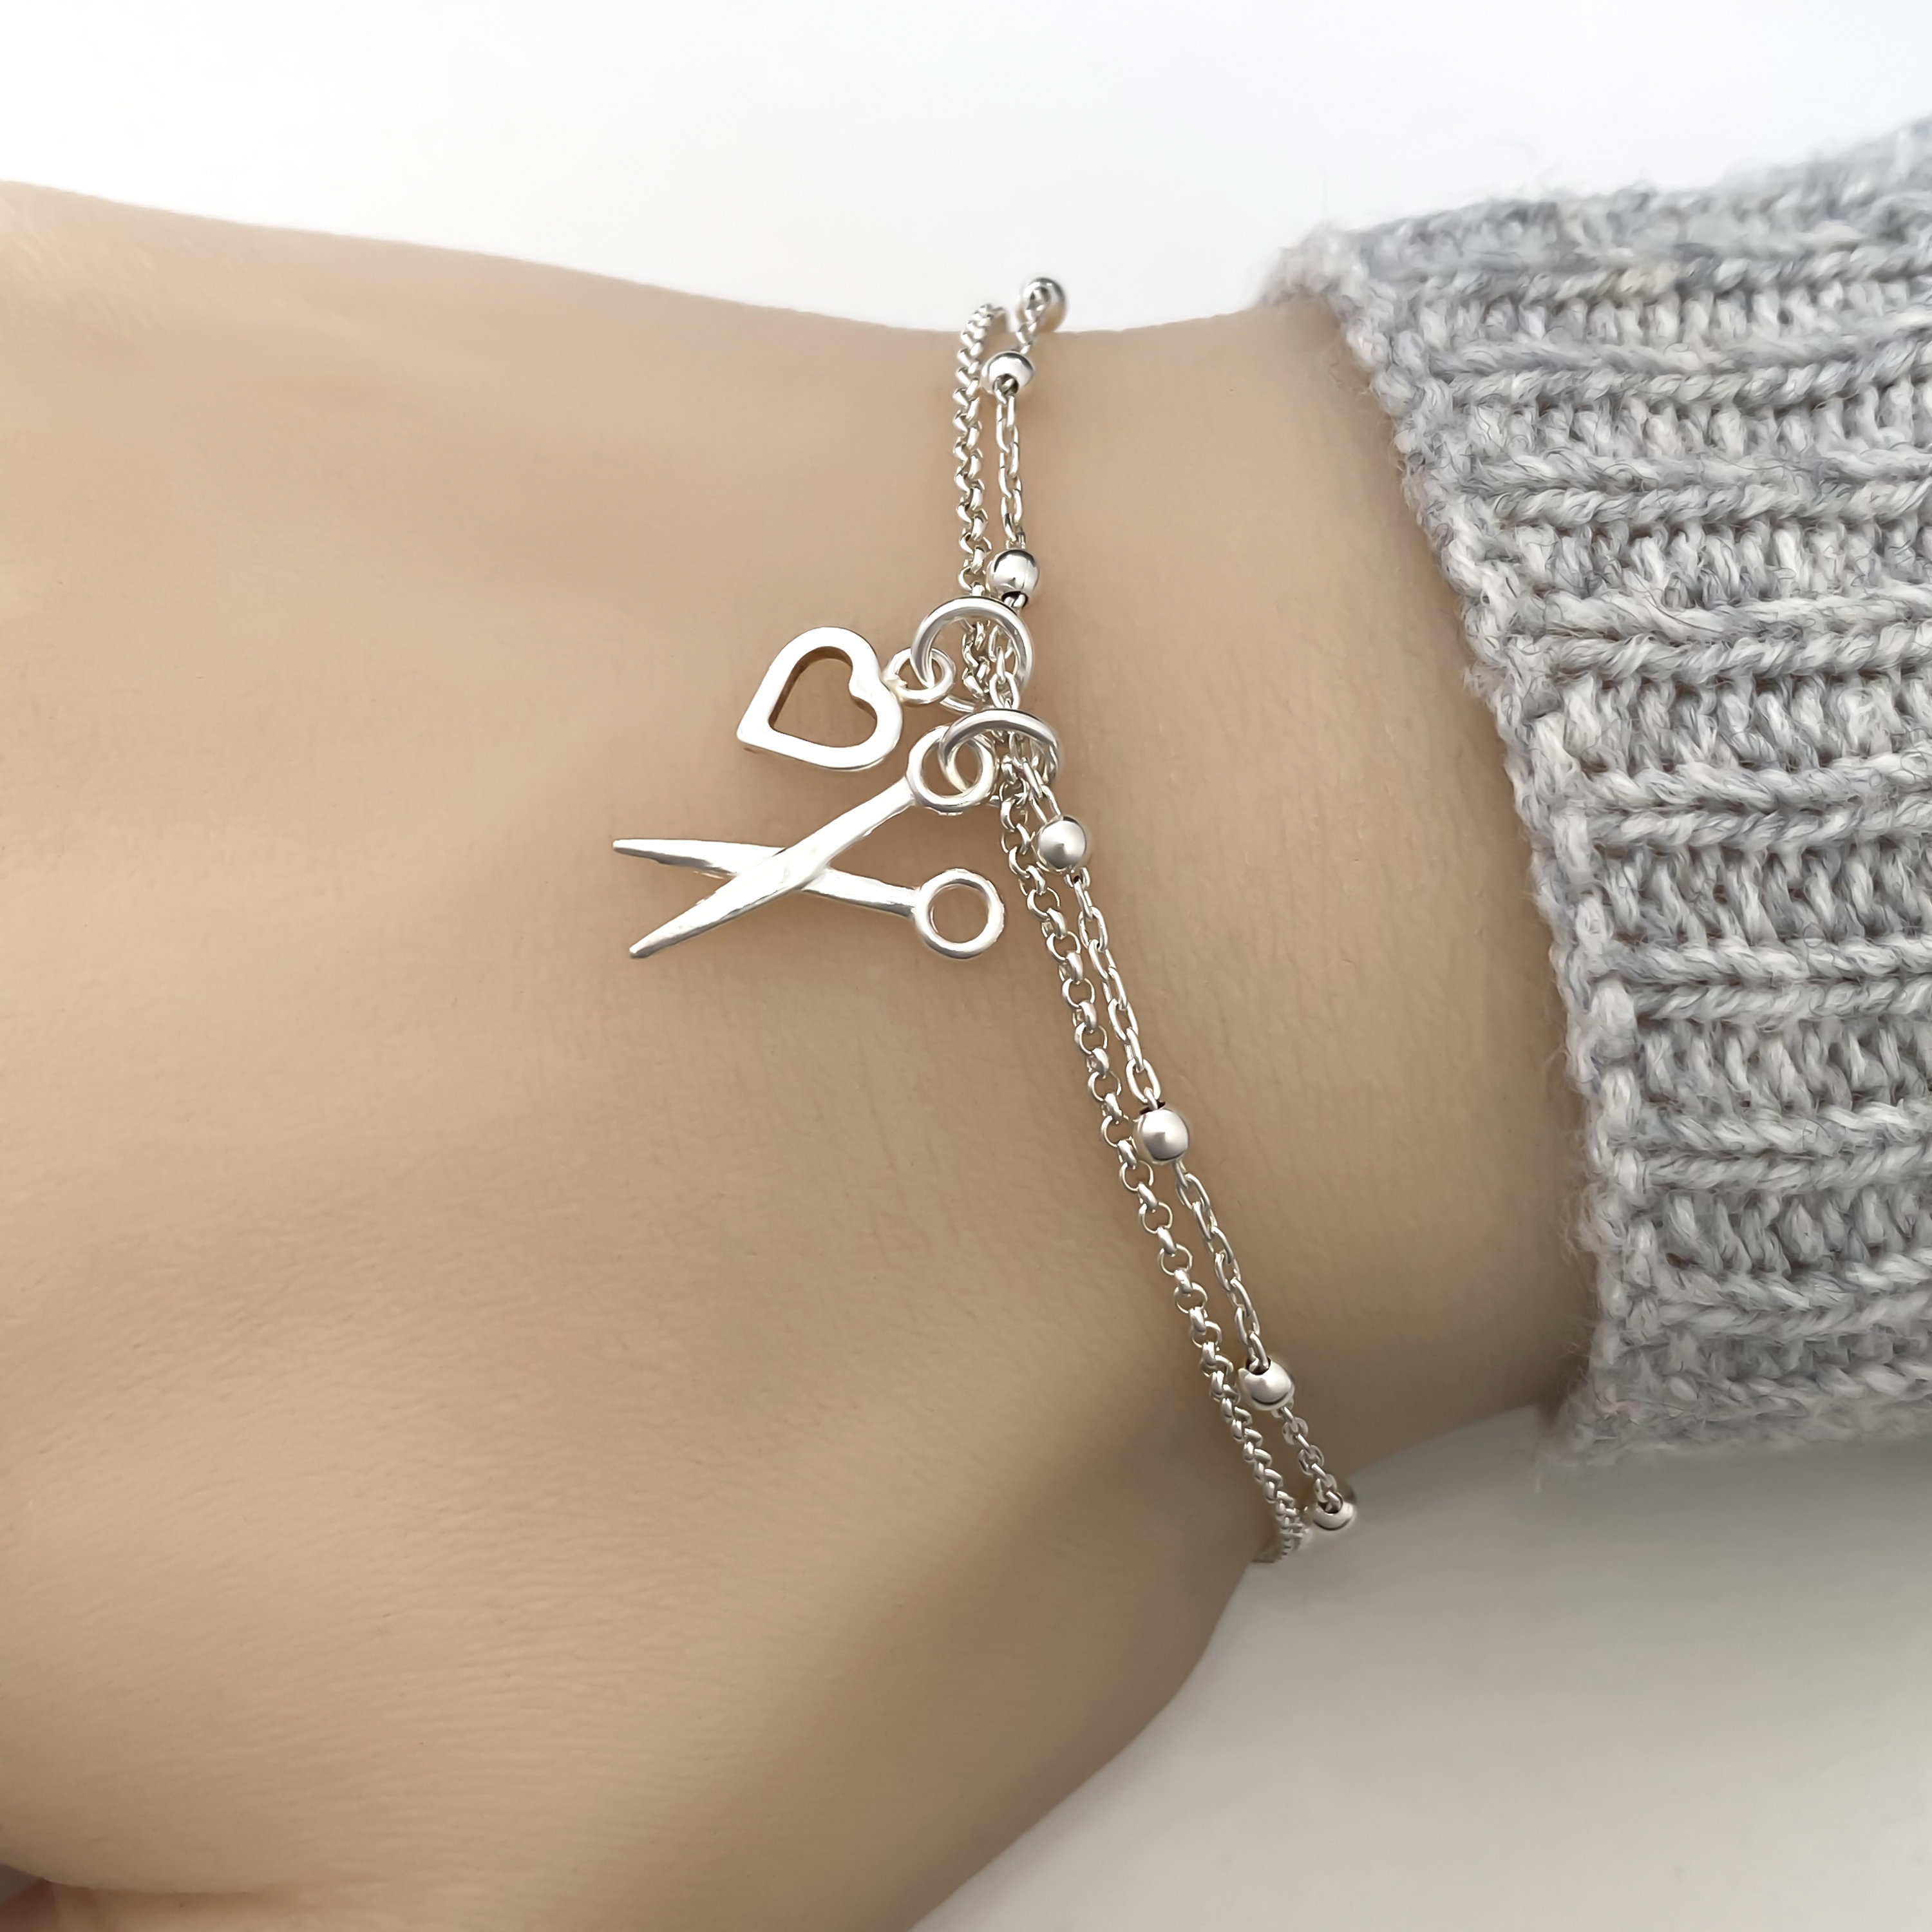 Adorable Scissors Charms Bracelet in Silver Finish